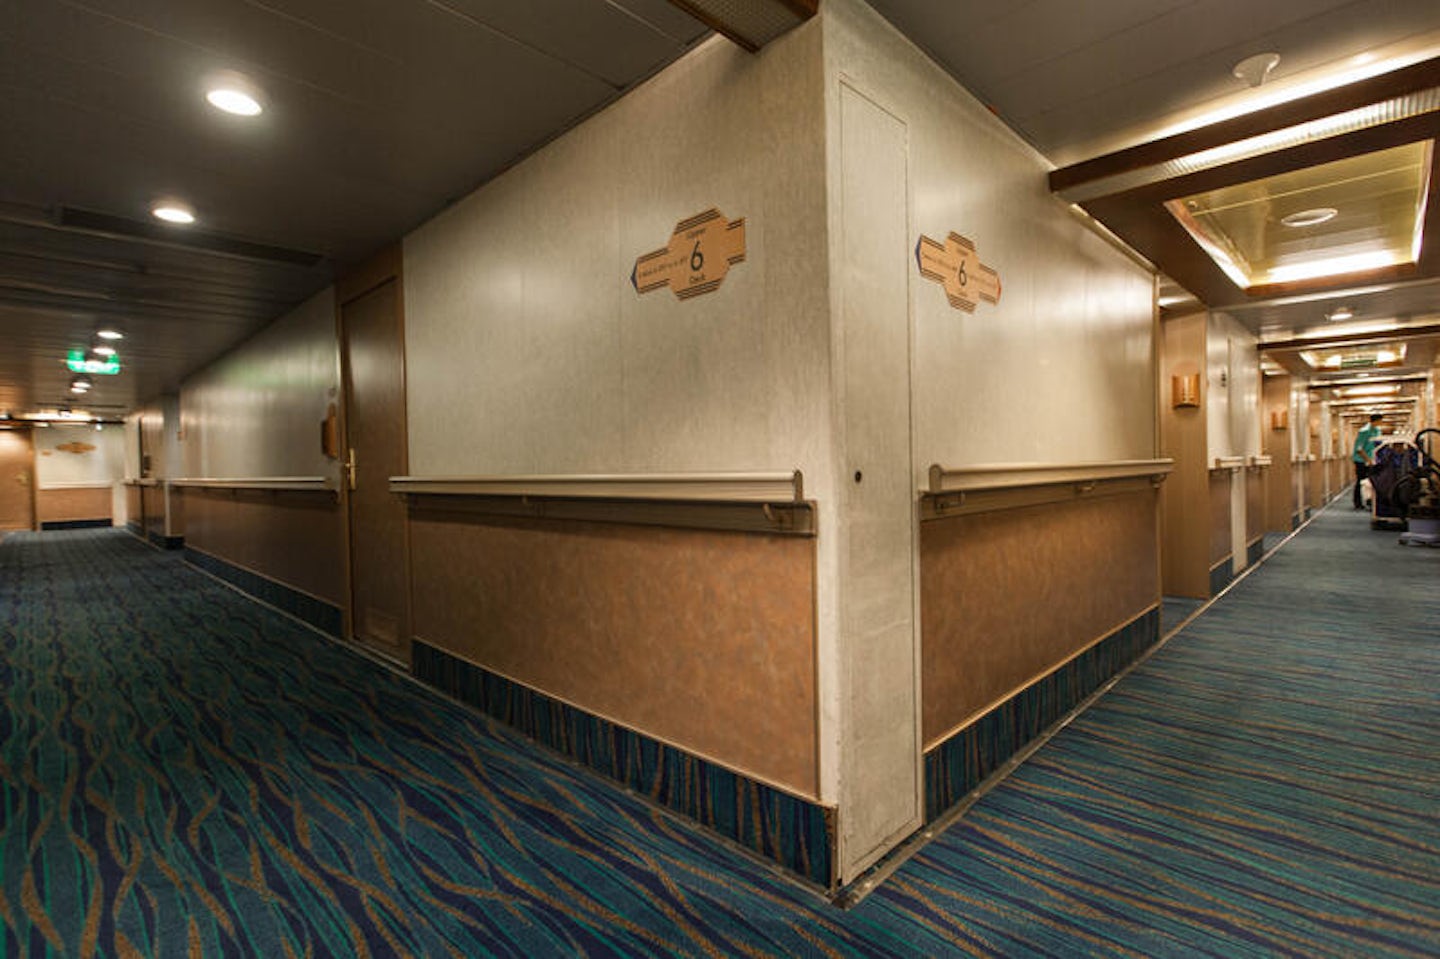 Hallways on Carnival Conquest